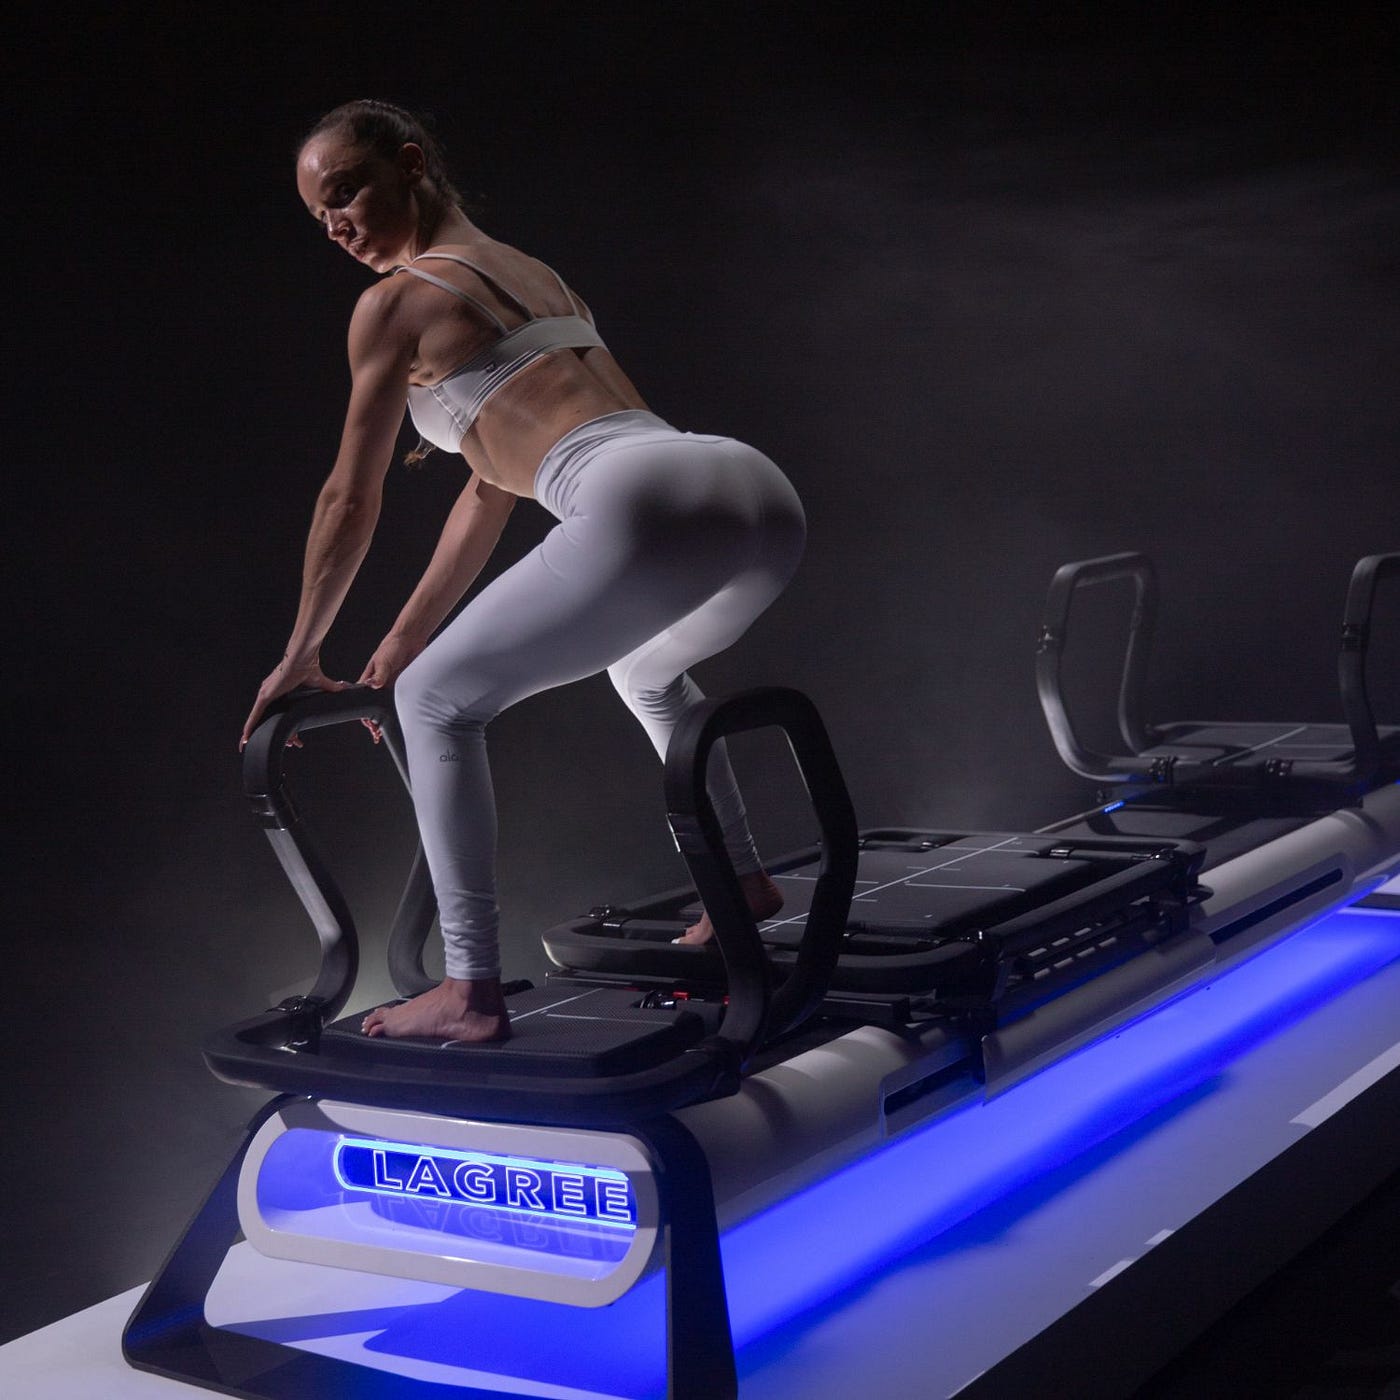 The First of Its Kind: The EVO-2. Global fitness company Lagree